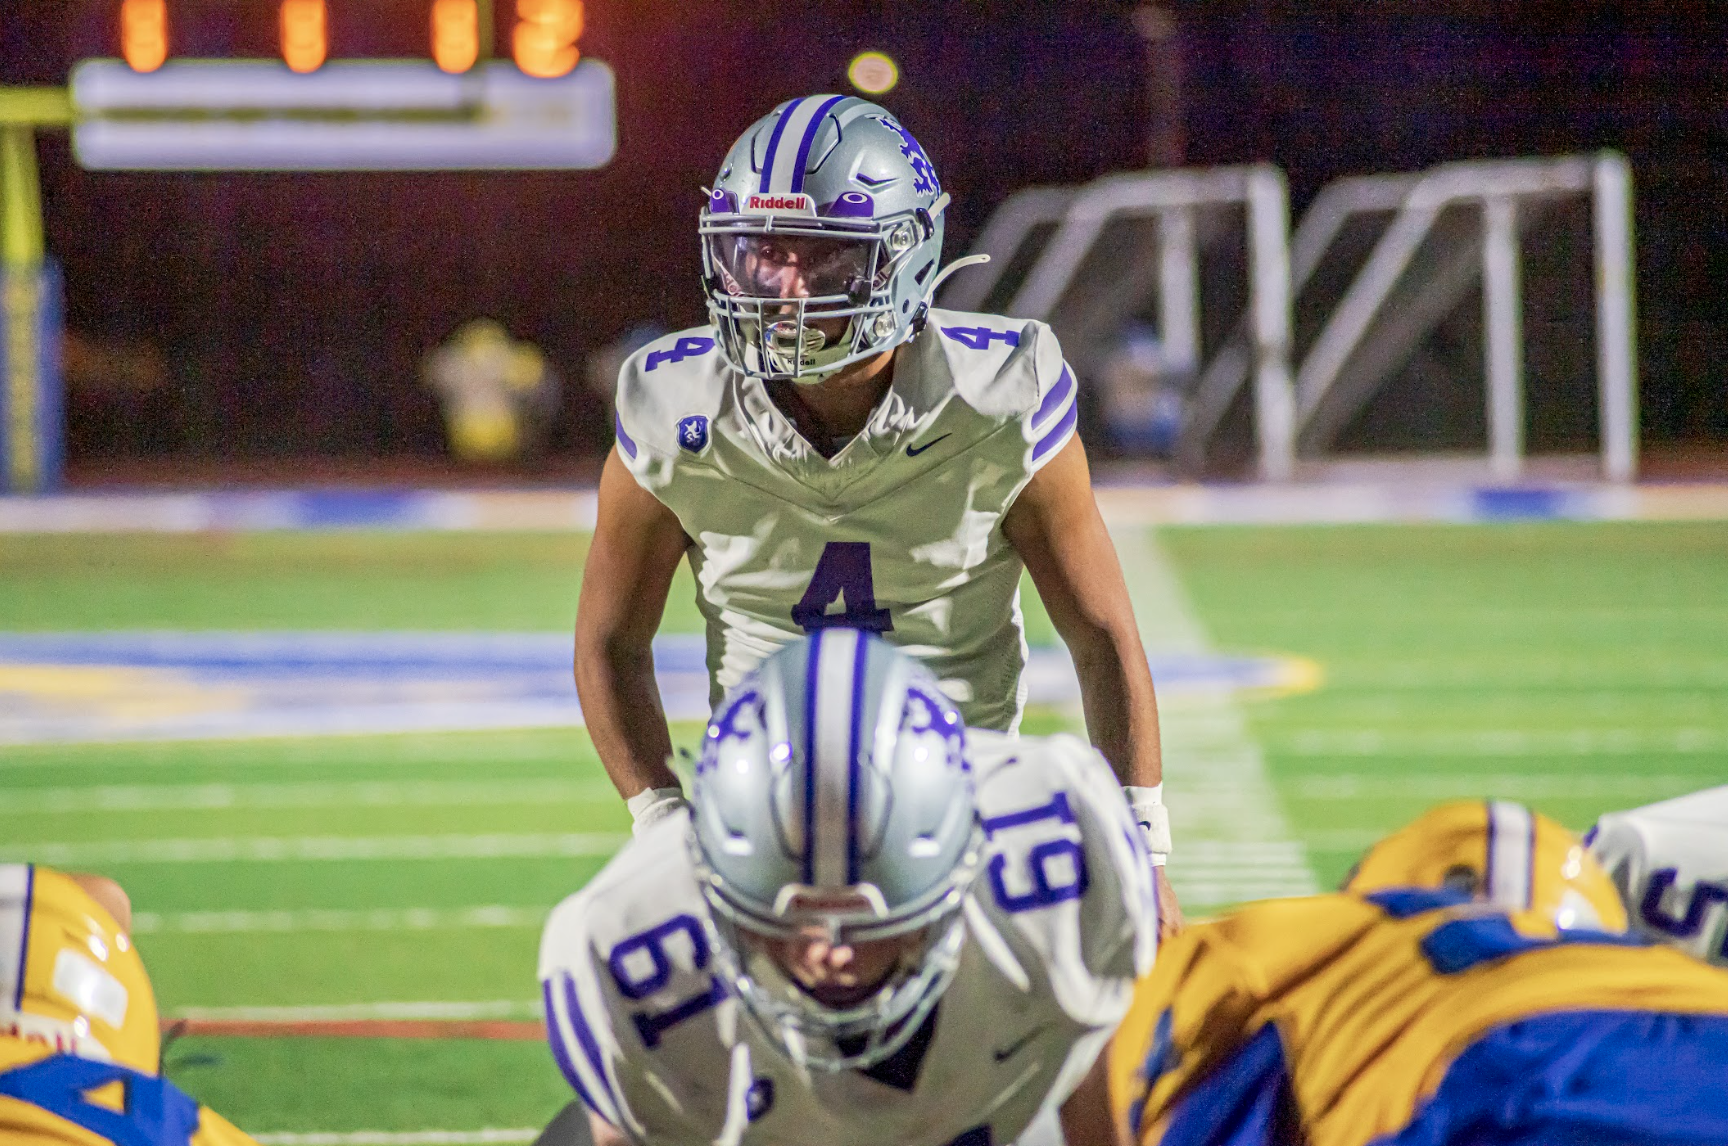 Piedmont’s Football Team Ends 14-Month Losing Streak, Aims for Playoff Run